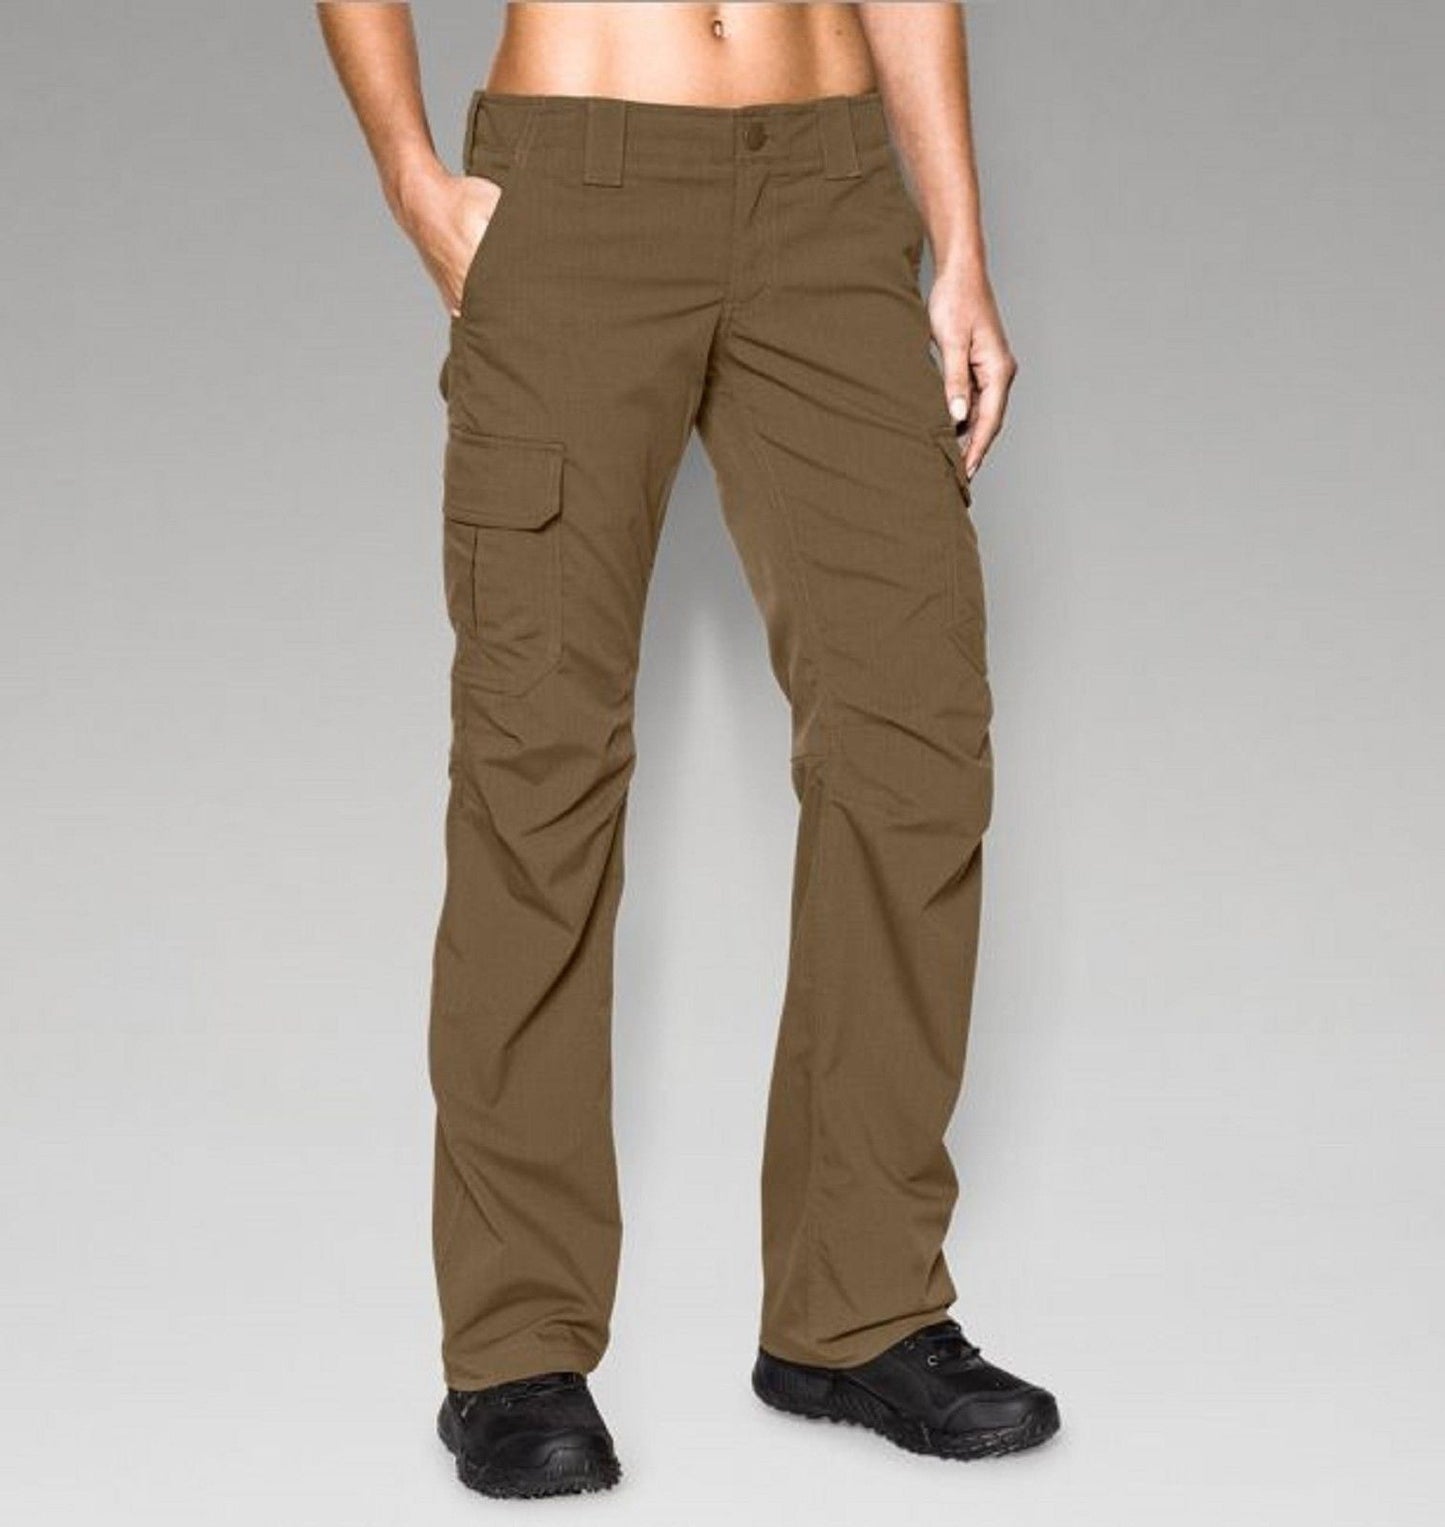 Under Armour Womens Tactical Patrol Pant - UA Loose-Fit Field Duty Cargo Pants